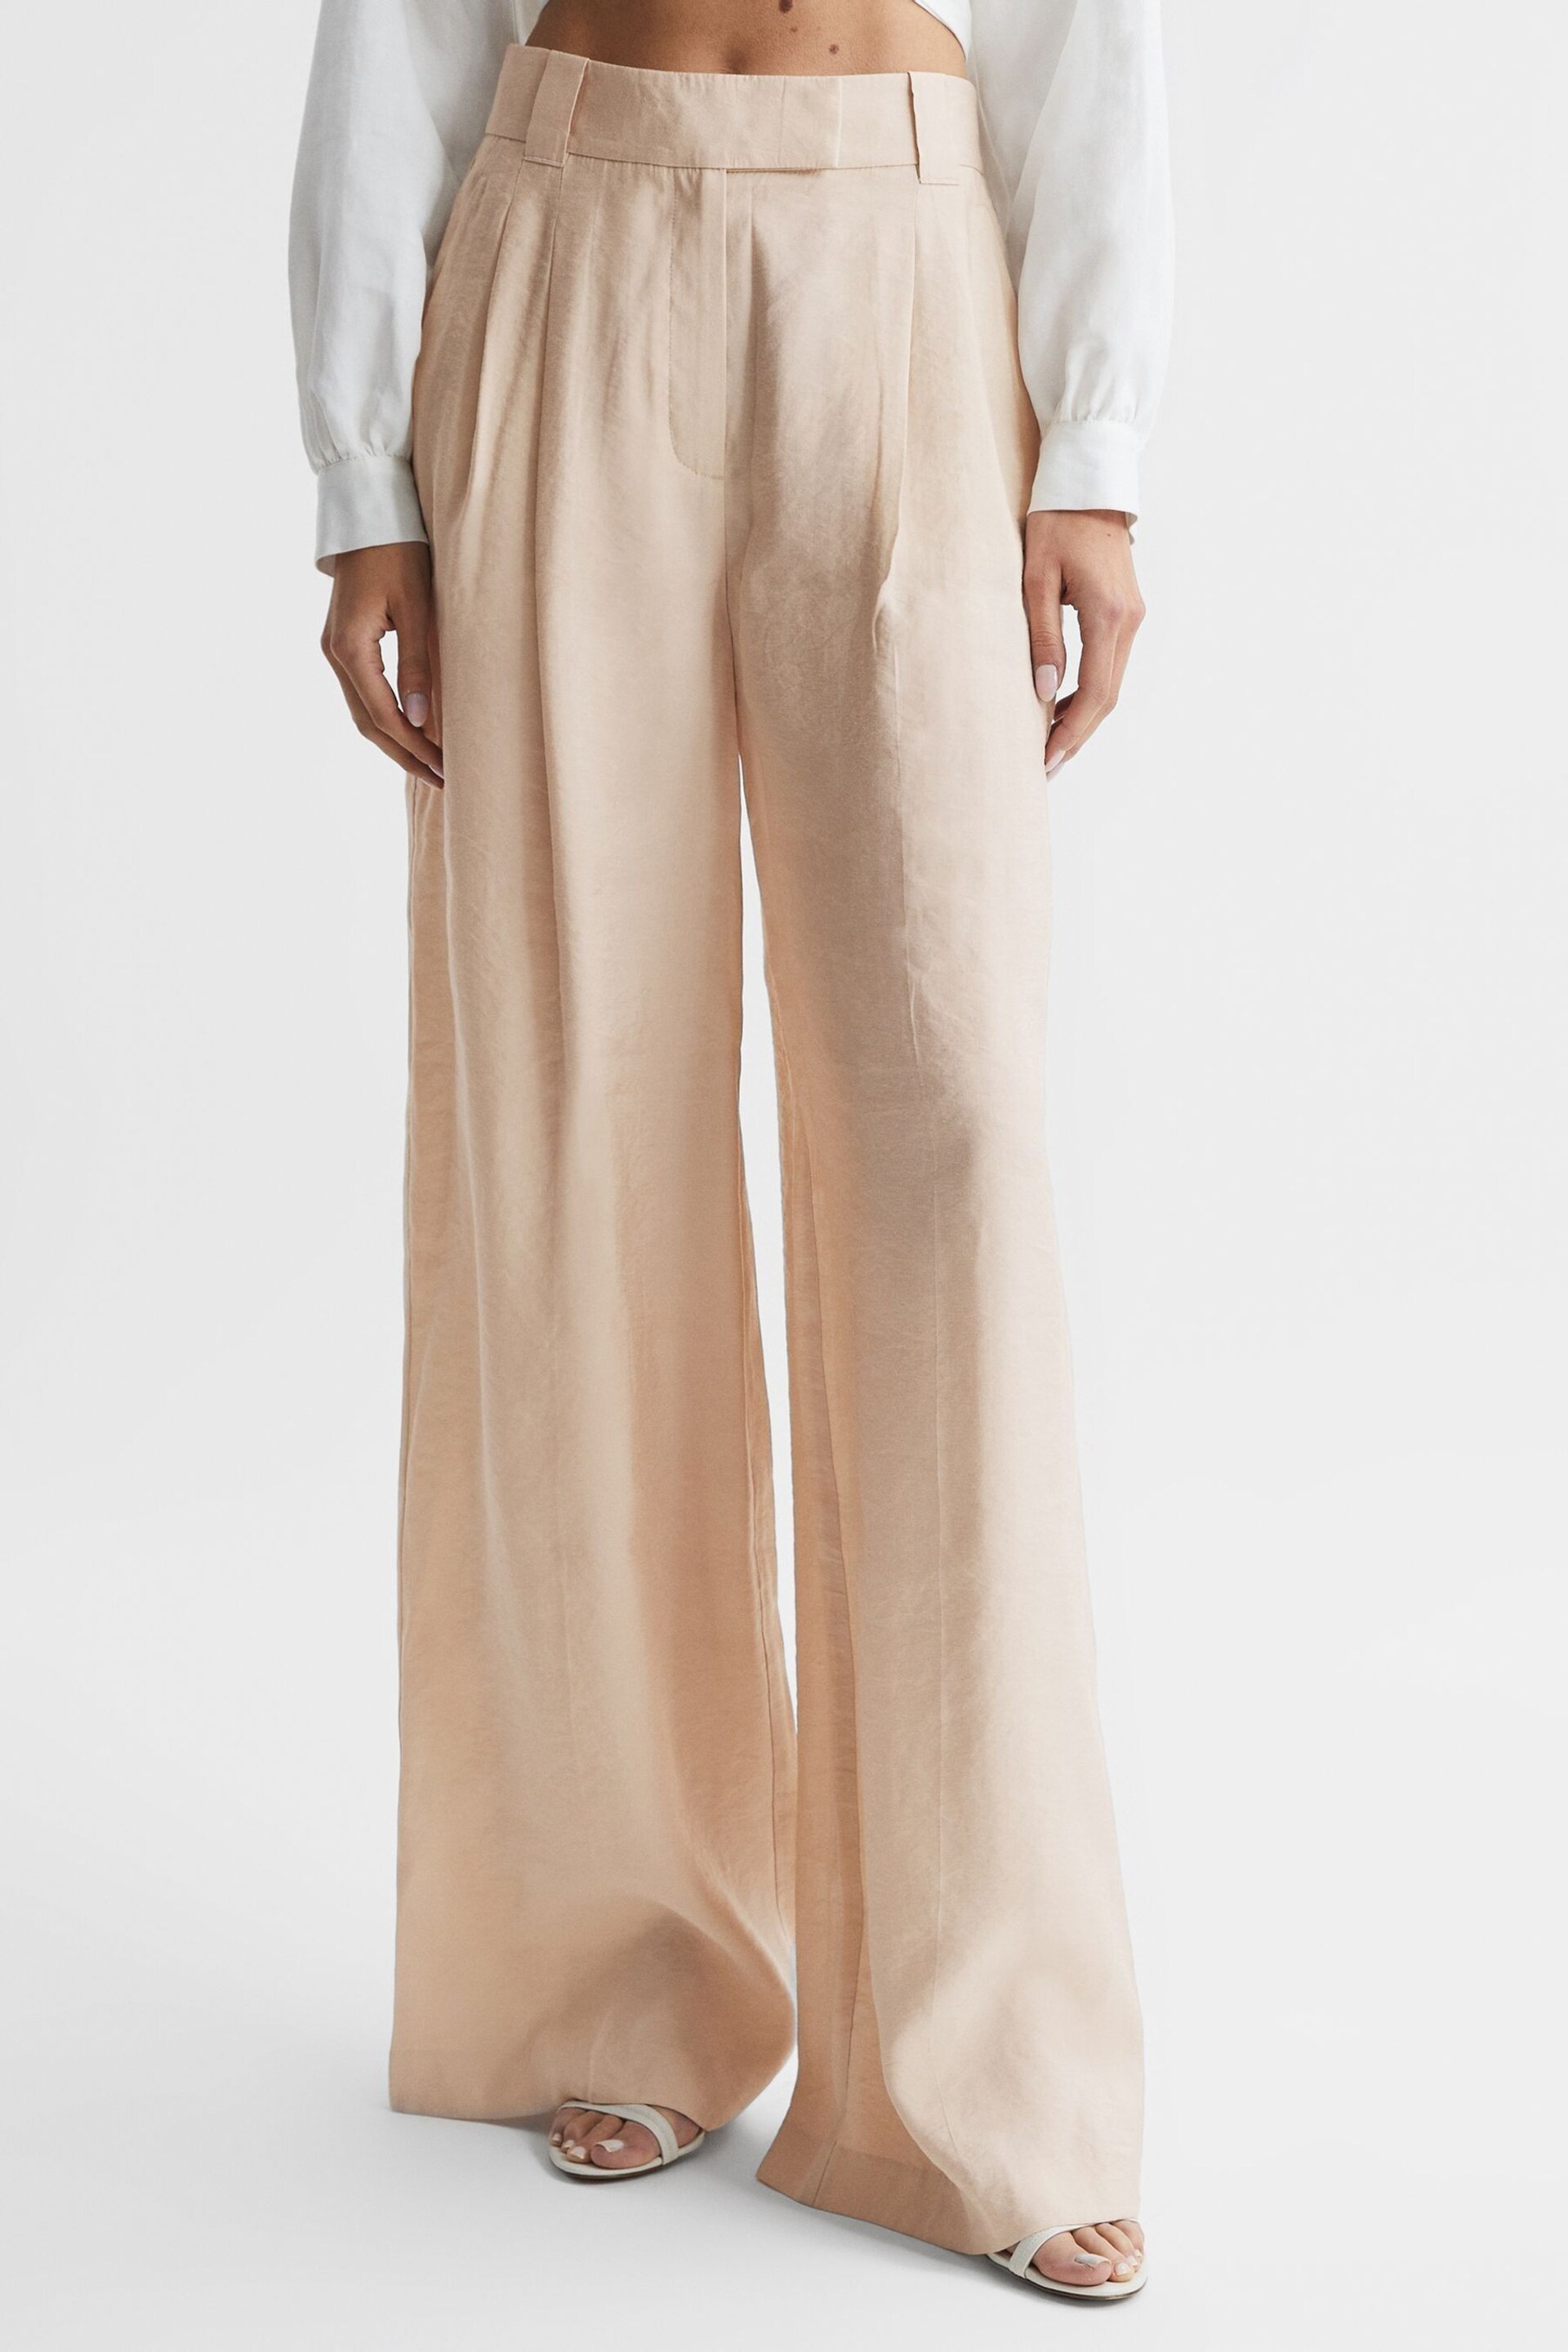 Reiss Nude Izzie Petite Wide Leg Occasion Trousers - Image 1 of 7